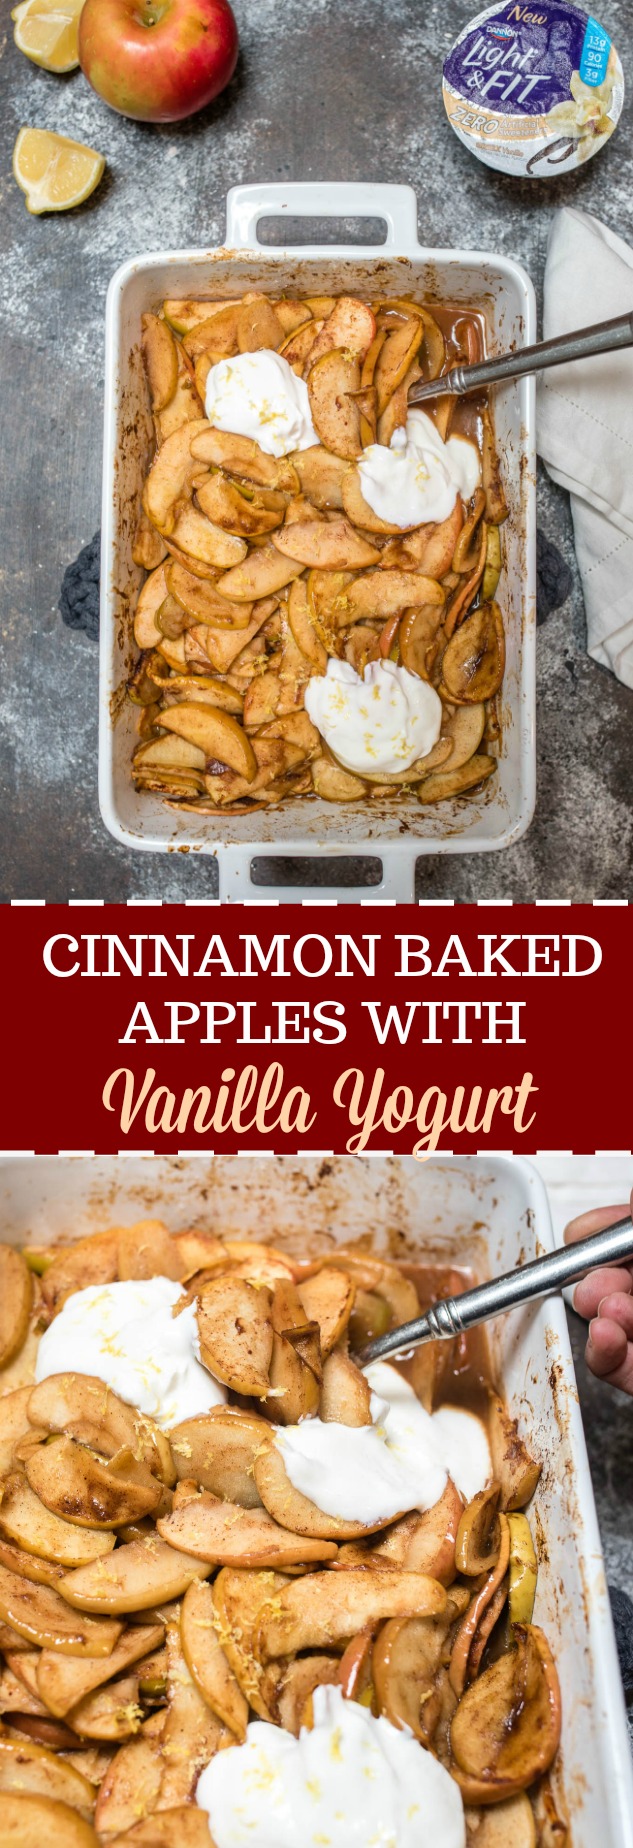 Cinnamon Baked Apples with Yogurt satisfies that apple pie sweet tooth while being a healthier option with fewer calories.